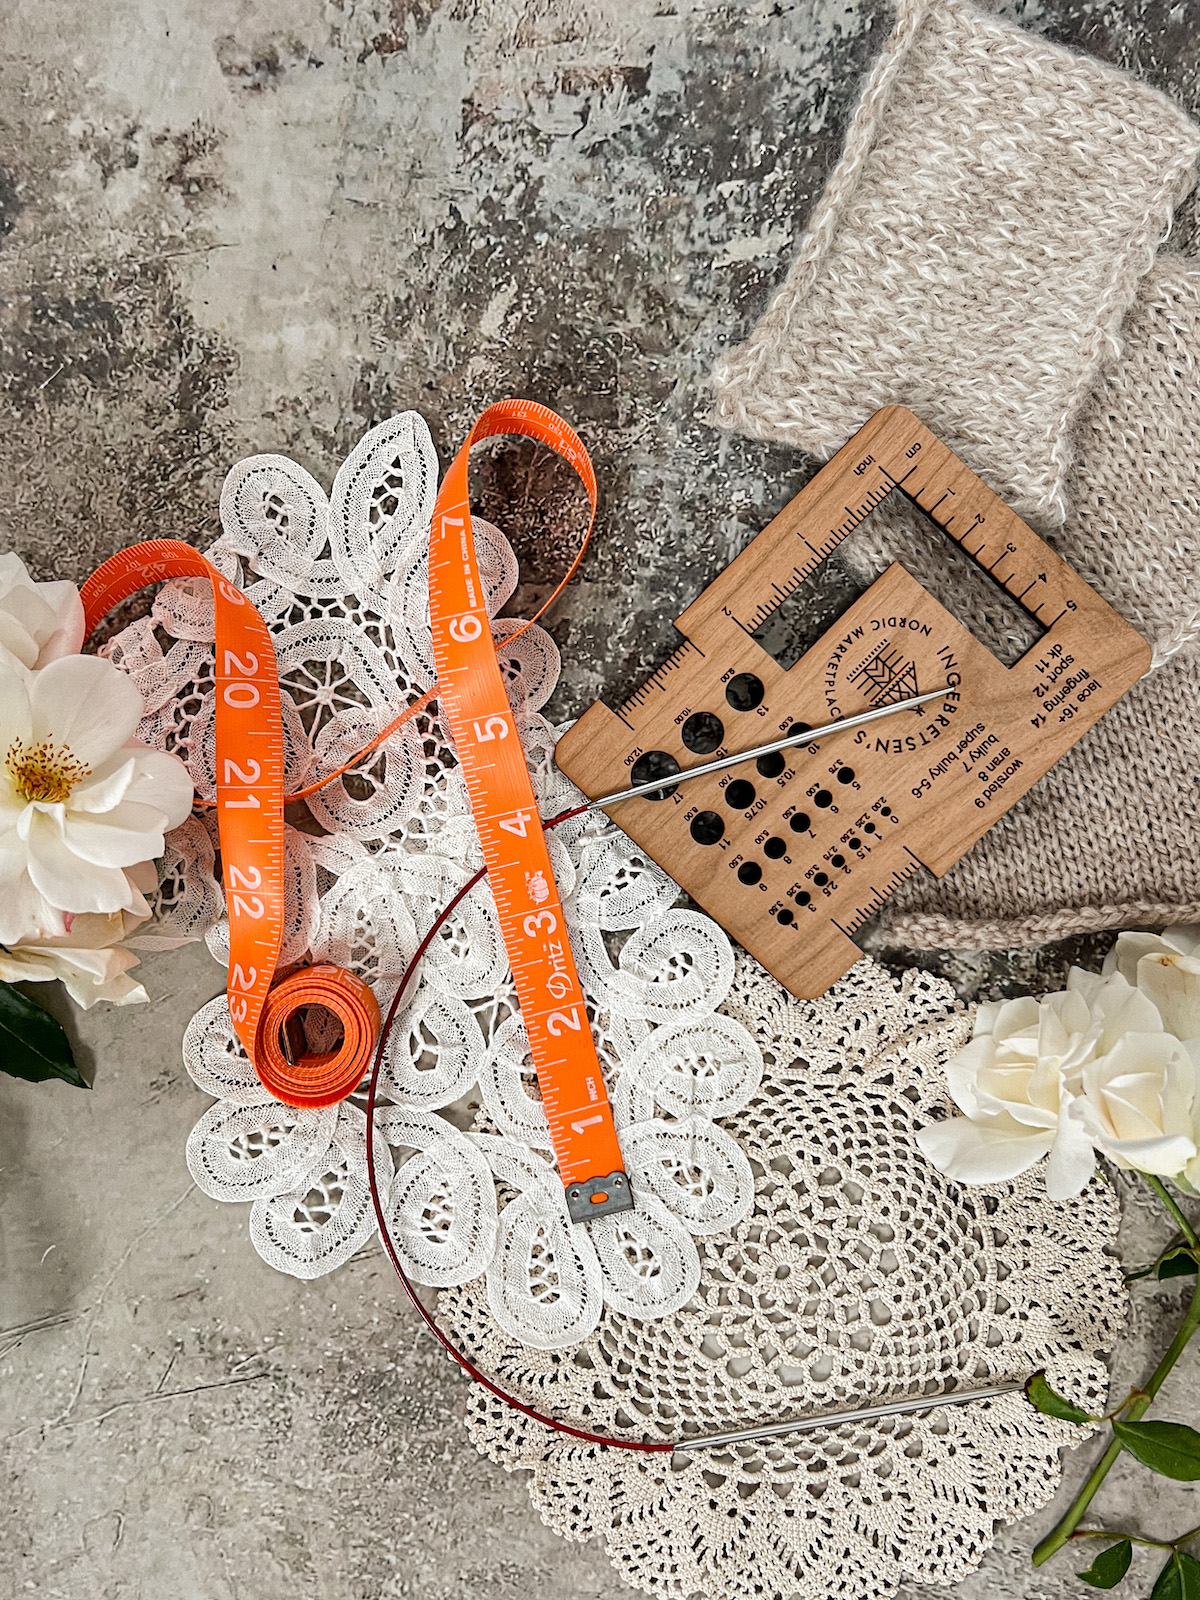 A top-down photograph showing an orange tape measure, a circular knitting needle, and a wooden needle gauge finder. They are surrounded by white roses, a few gauge swatches, and some antique doilies.